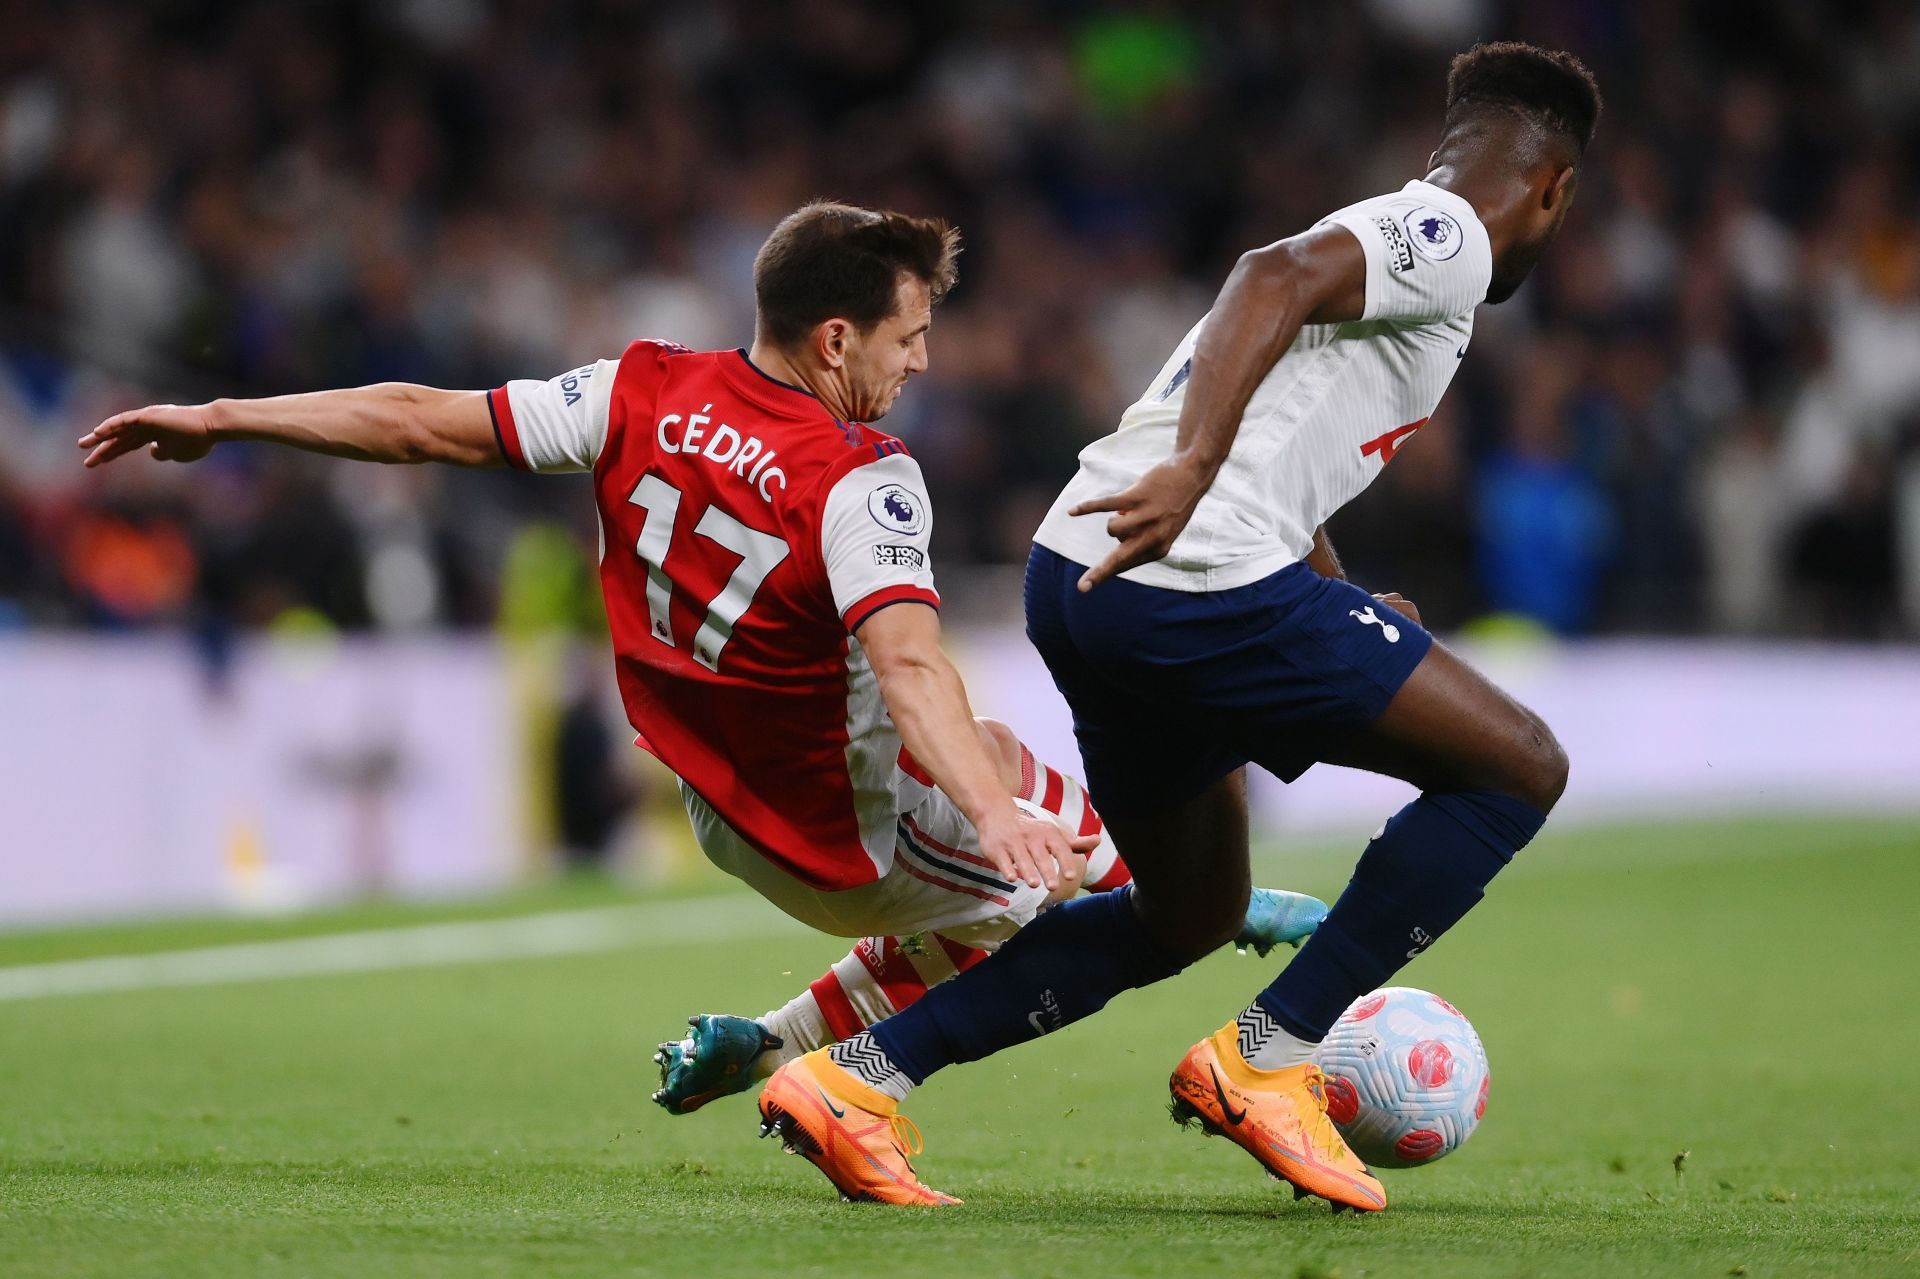 The Gunners slipped up to their north London rivals